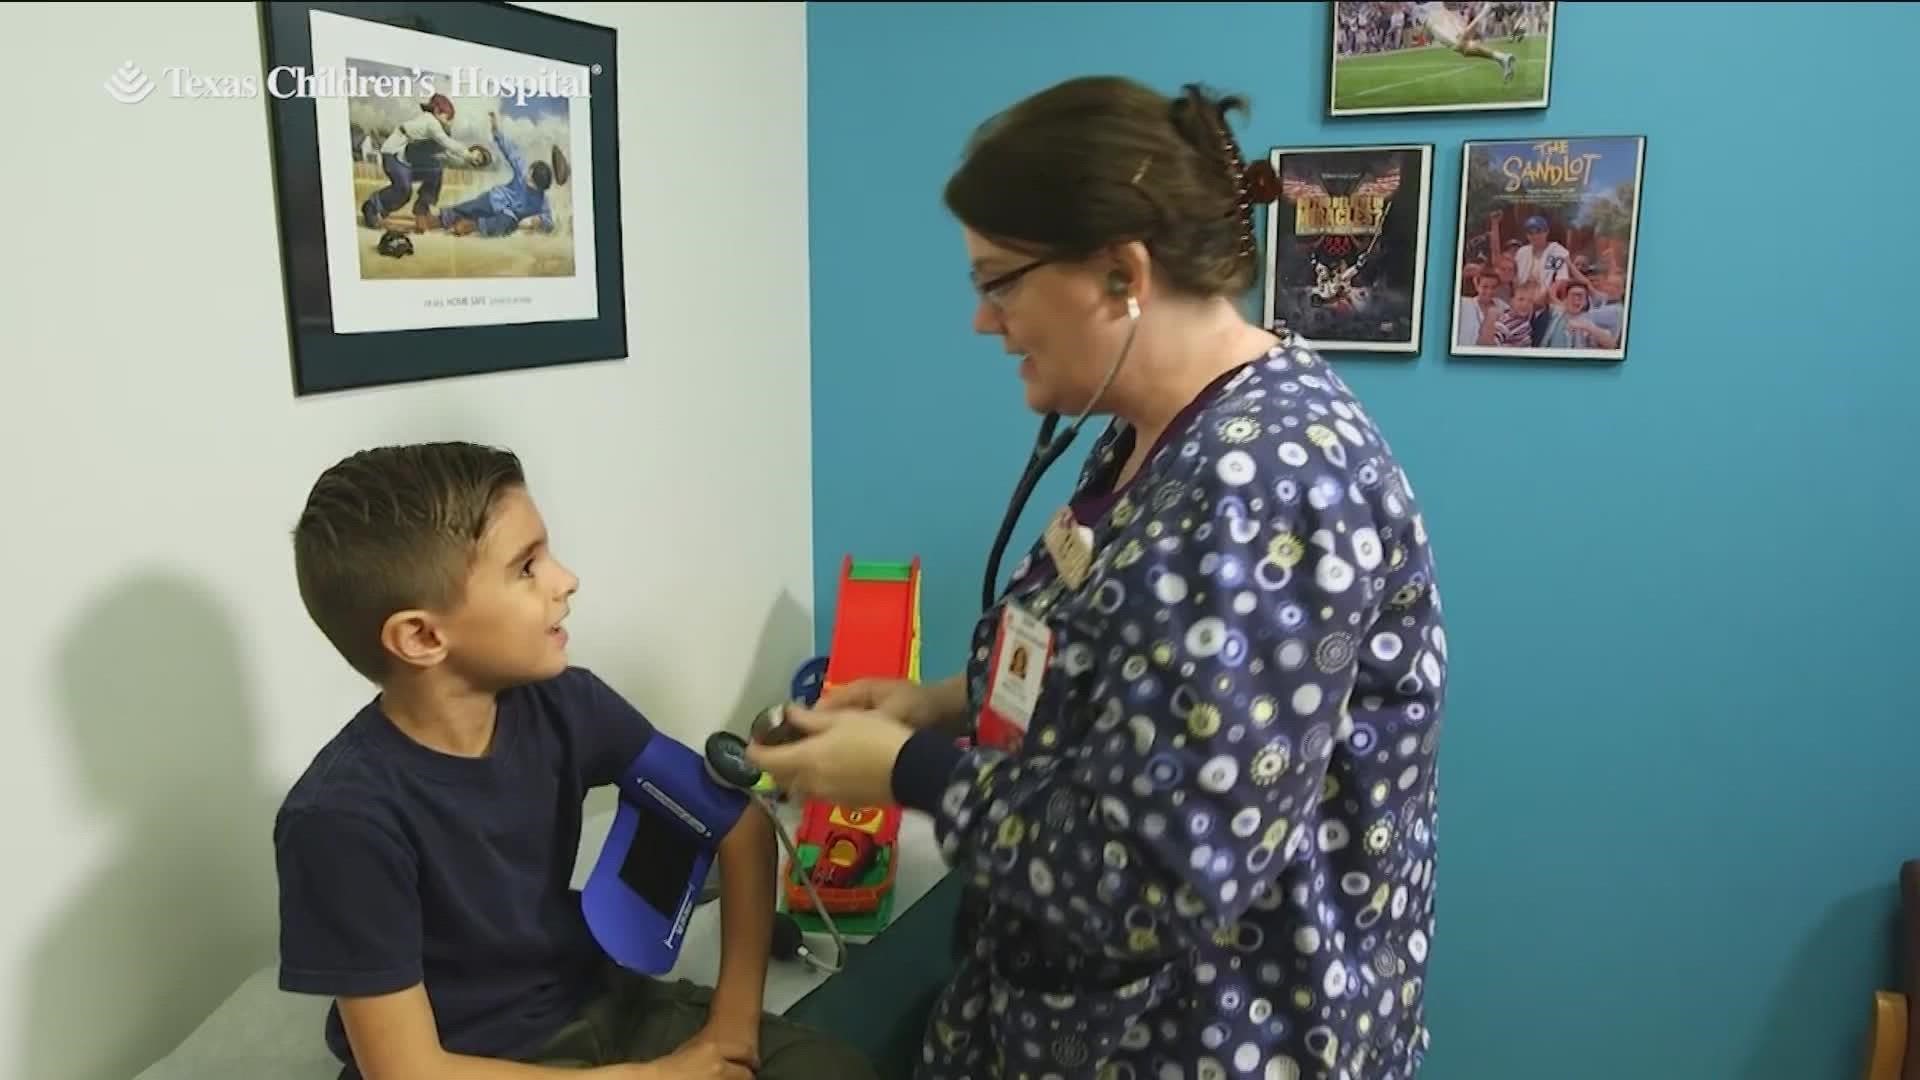 In an effort to bring more medical care to children in Central Texas, the Texas Children's Pediatrics is expanding their resources around the area.